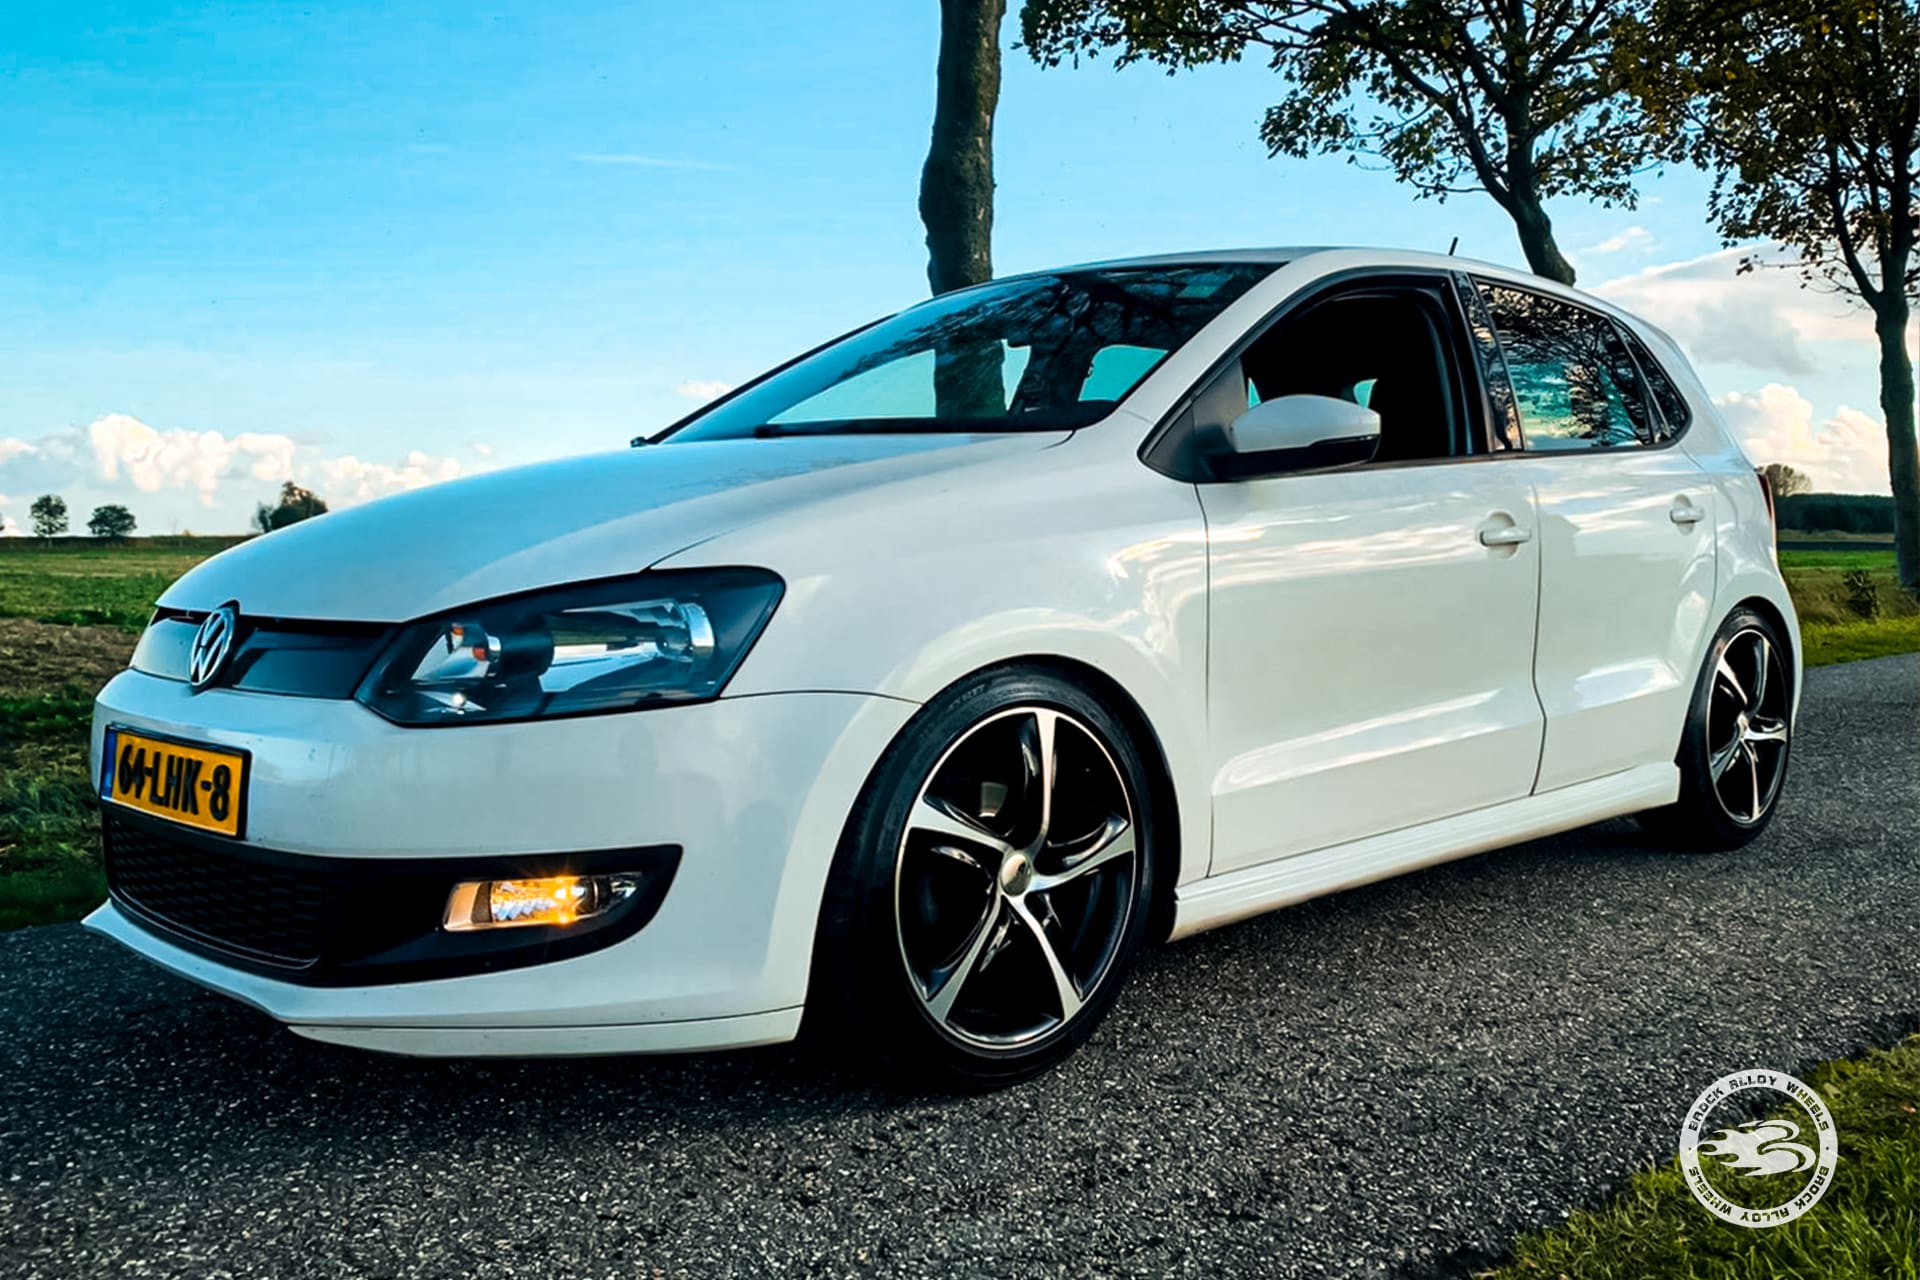 VW Polo with Brock B25 wheels in 7.5x17 black gloss full polished